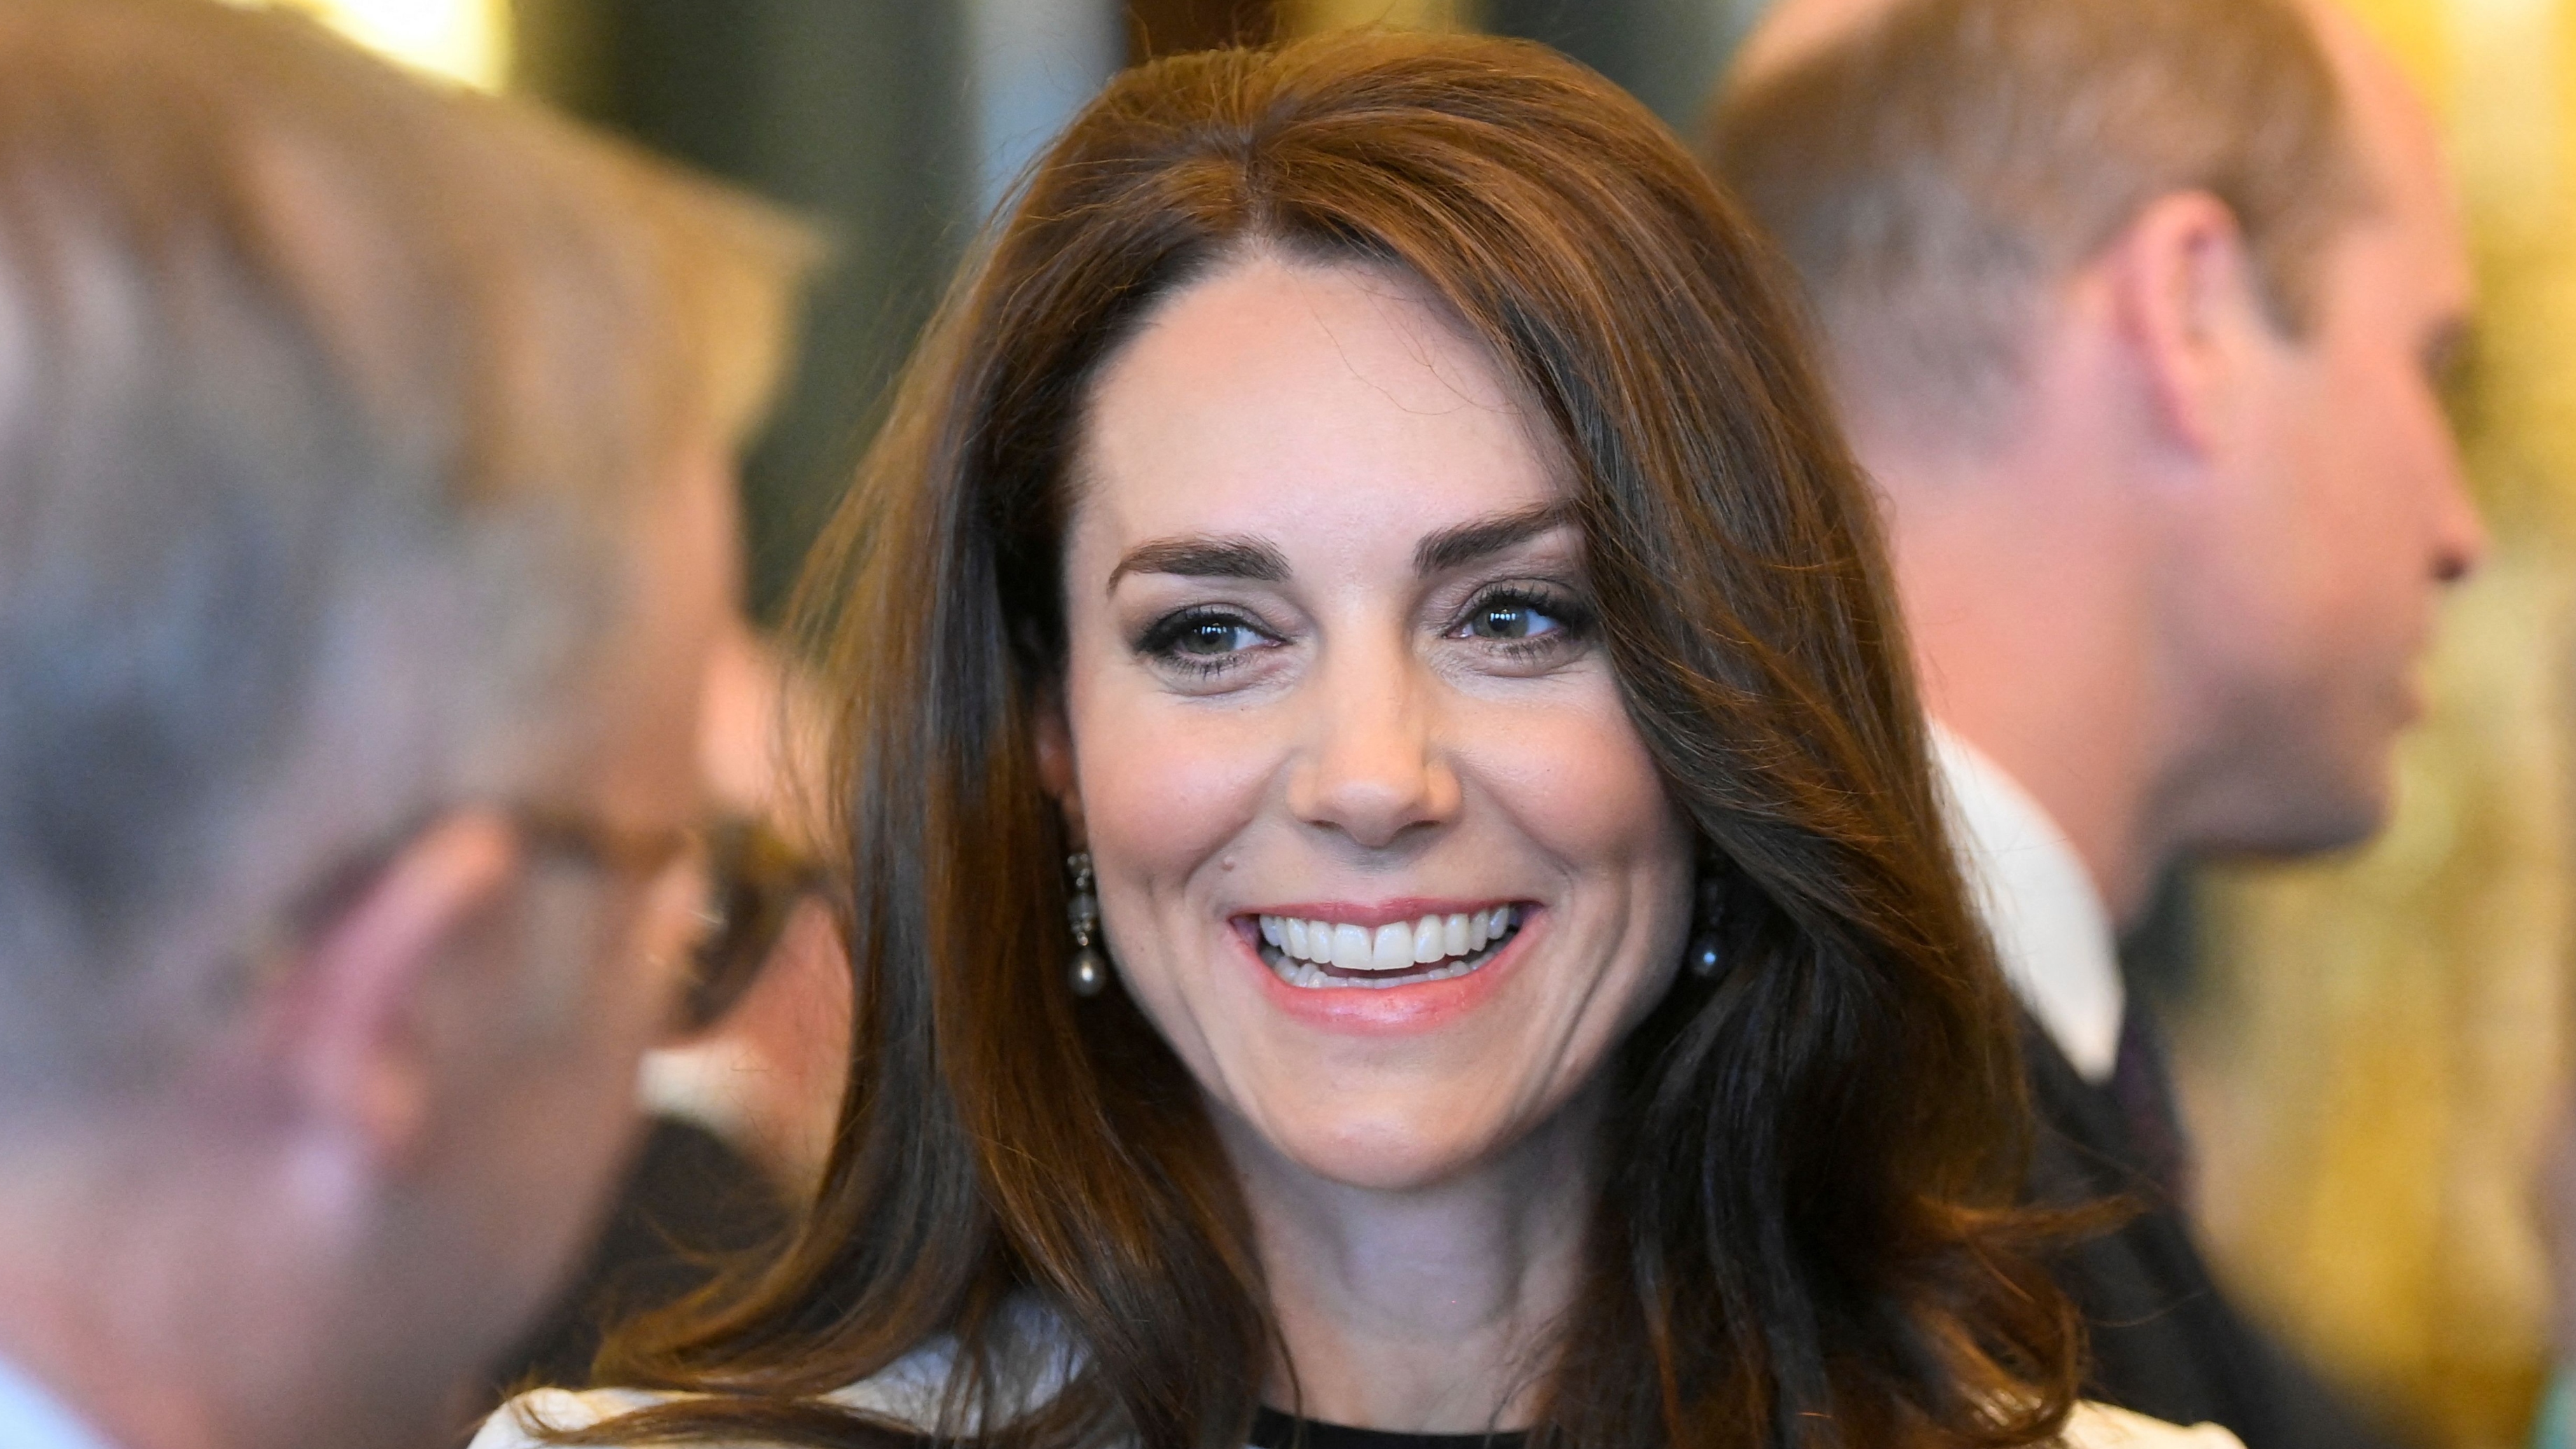 Longchamp Bags Like Kate Middleton's Are on Sale